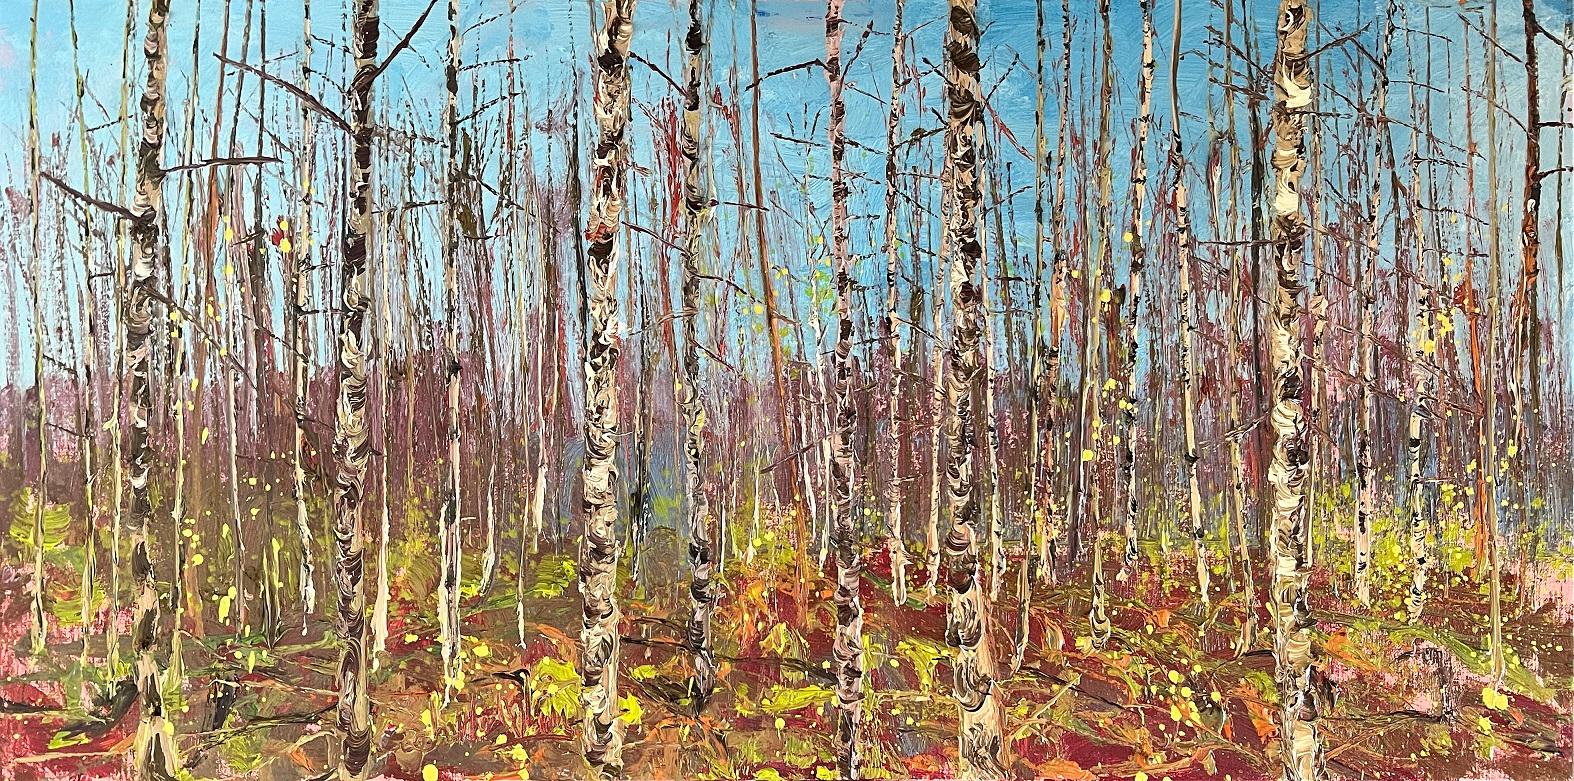 Gertjan Scholte-Albers Landscape Painting - Just am Birches Oil Painting on Canvas Forest Trees Nature In Stock